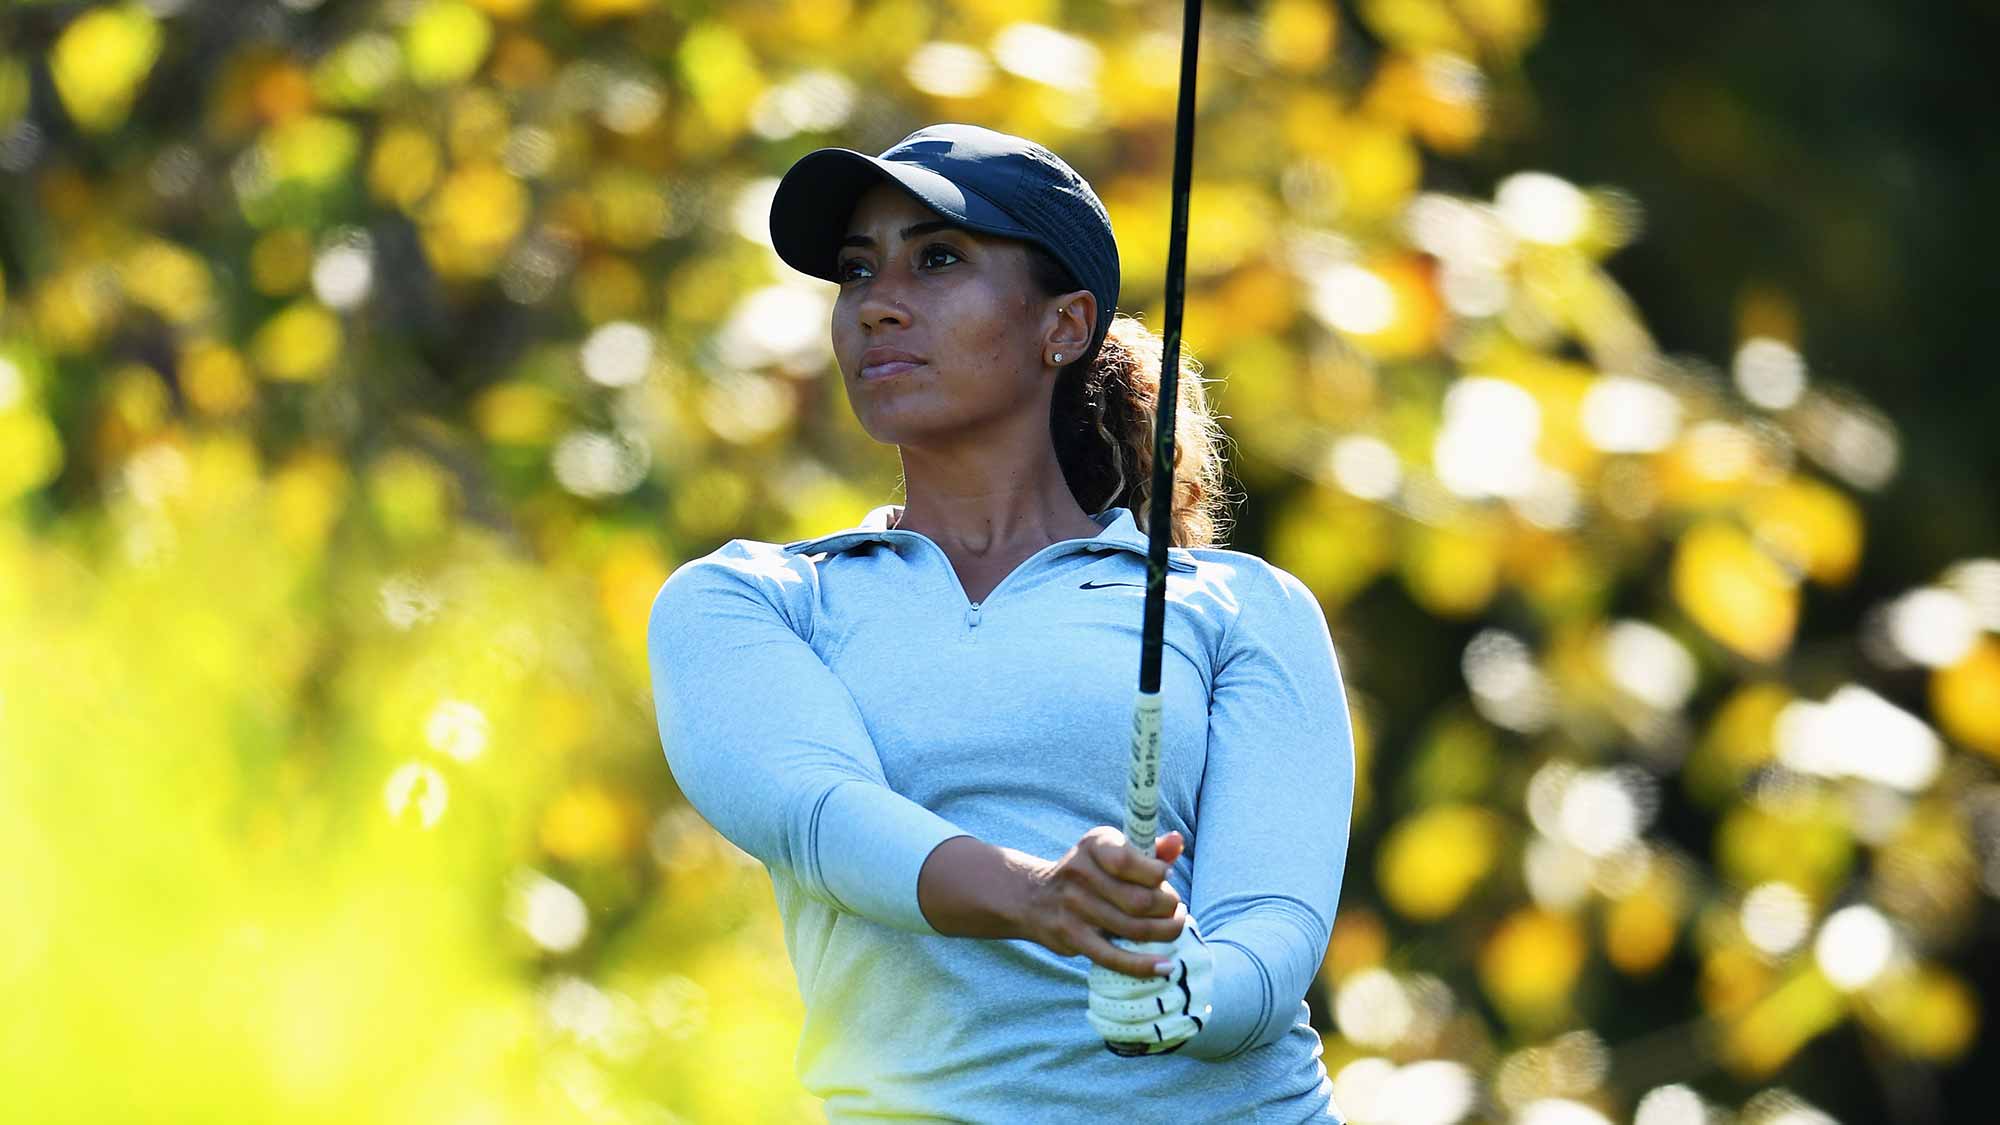 Cheyenne Woods of USA plays a shot during practice prior to the start of the Evian Championship